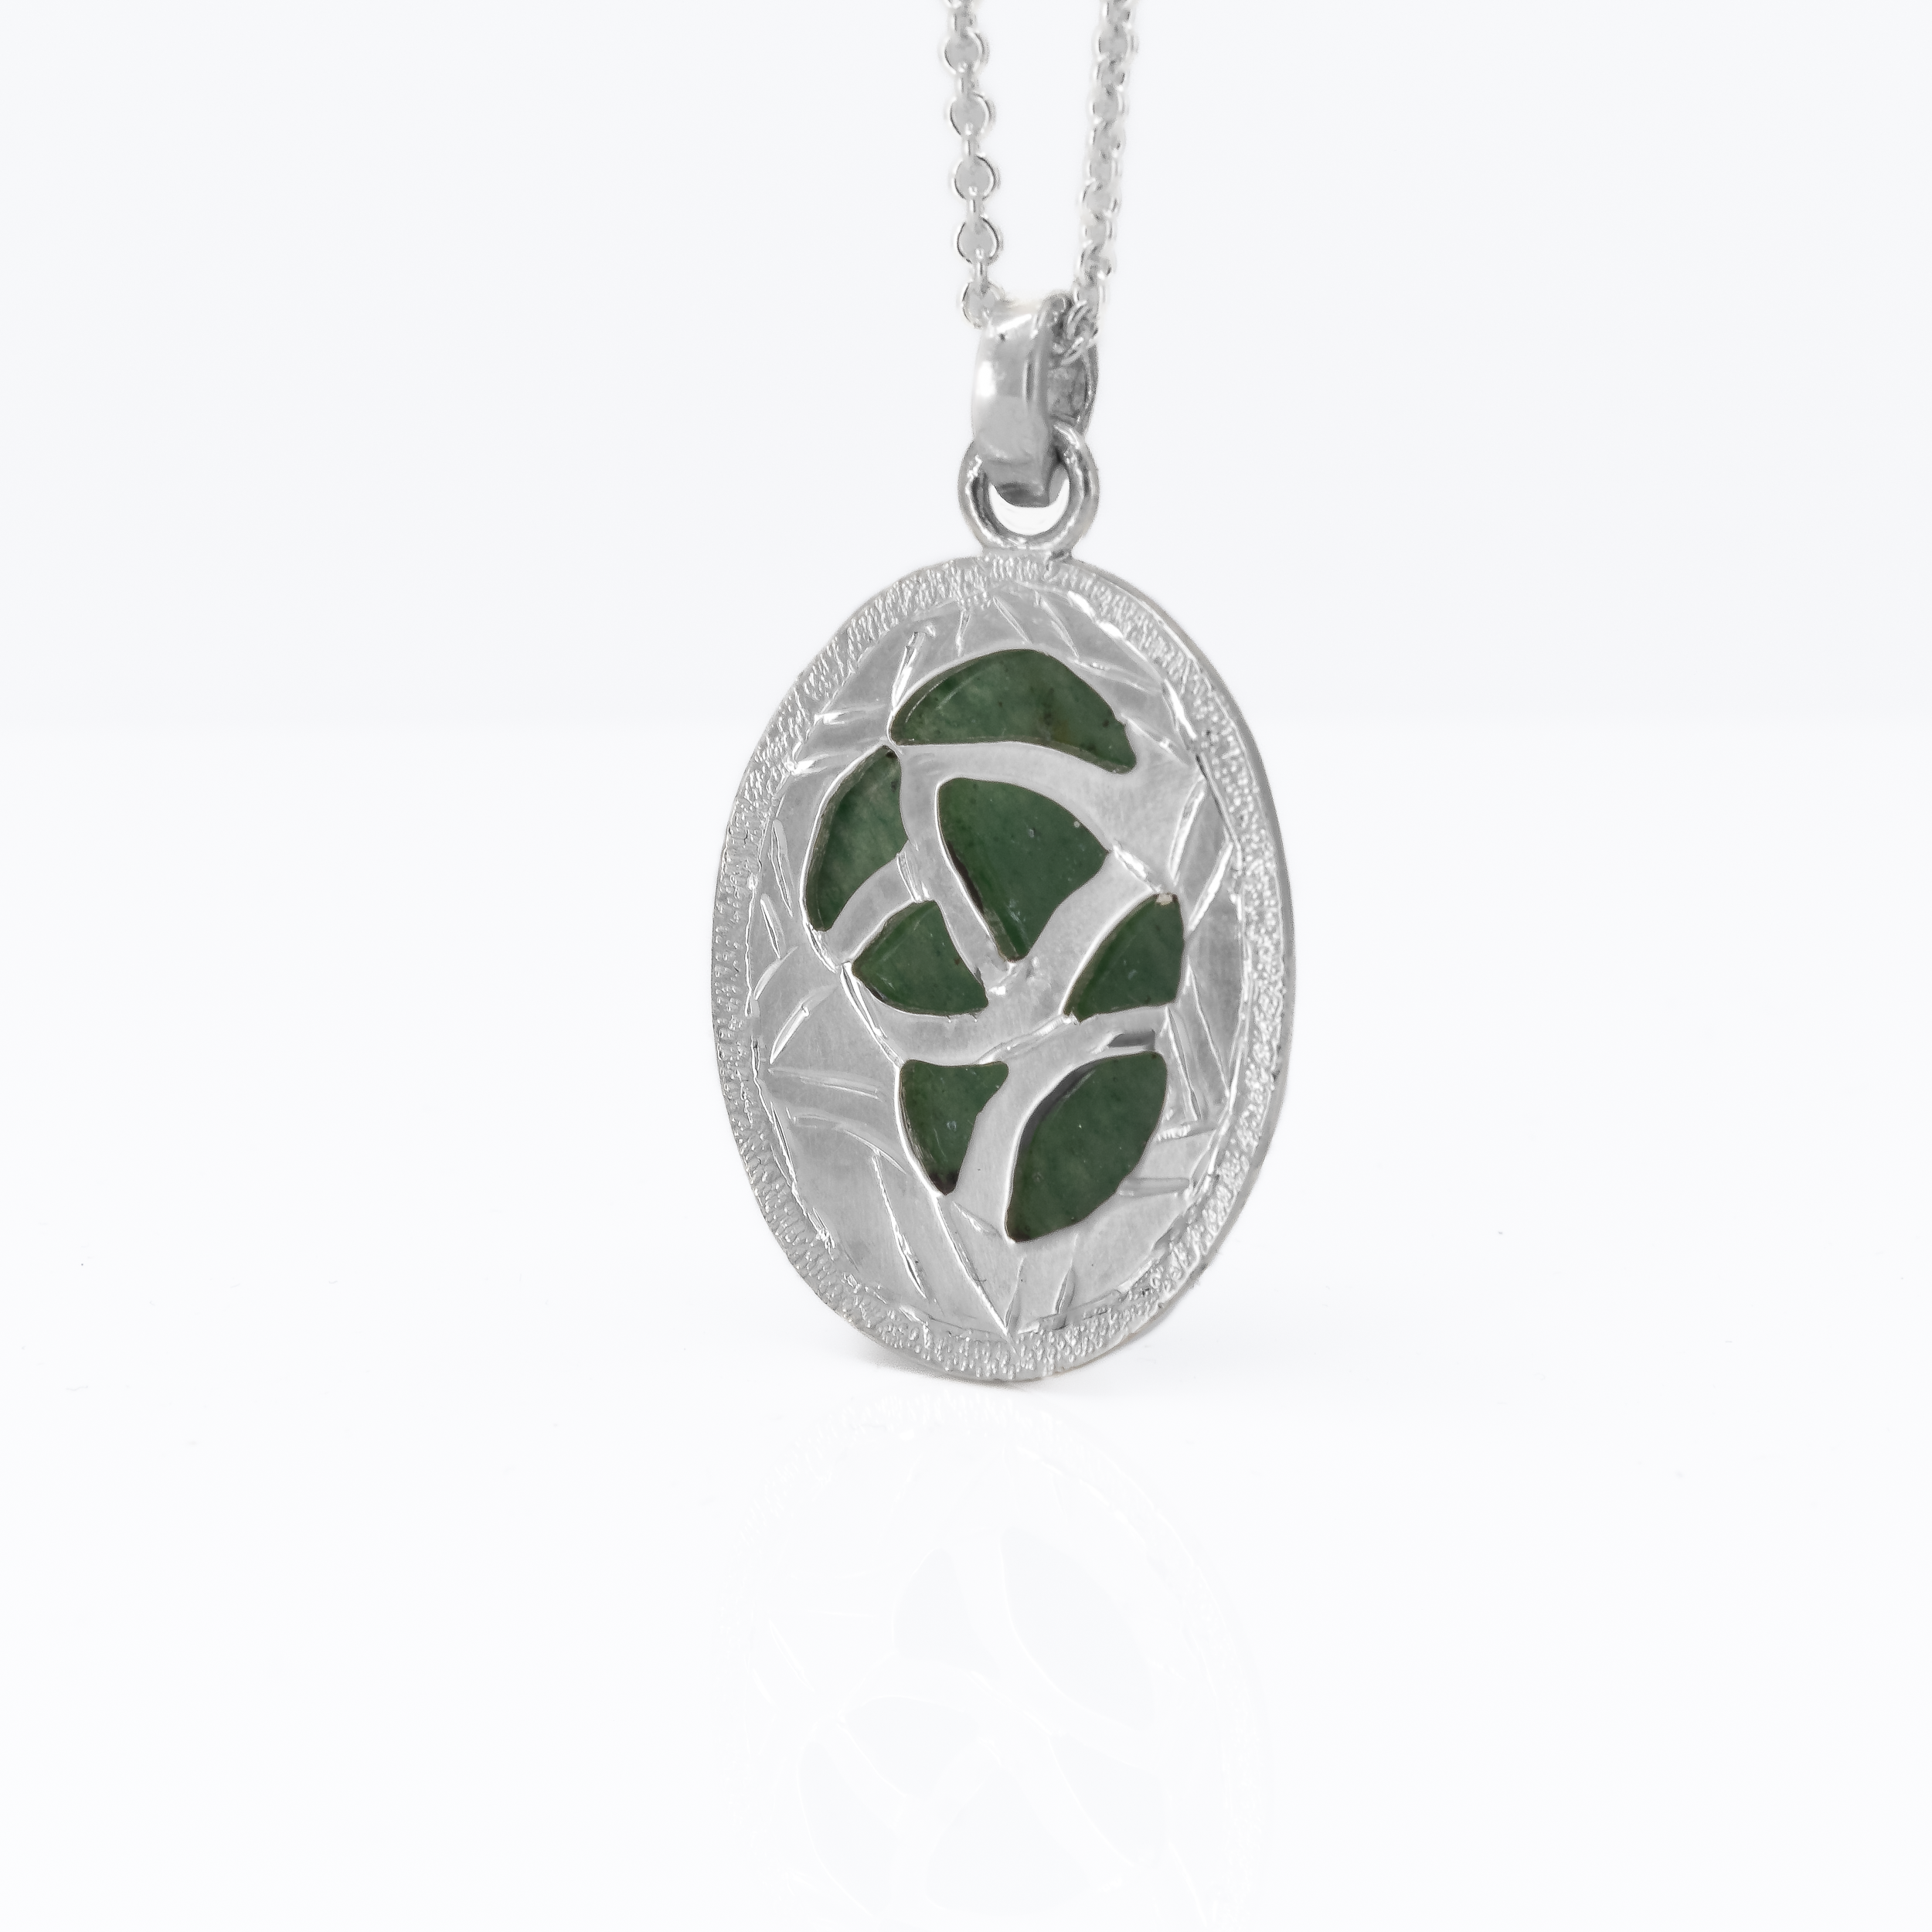 Back of an oval green jade pendant with hand engraved patterns.